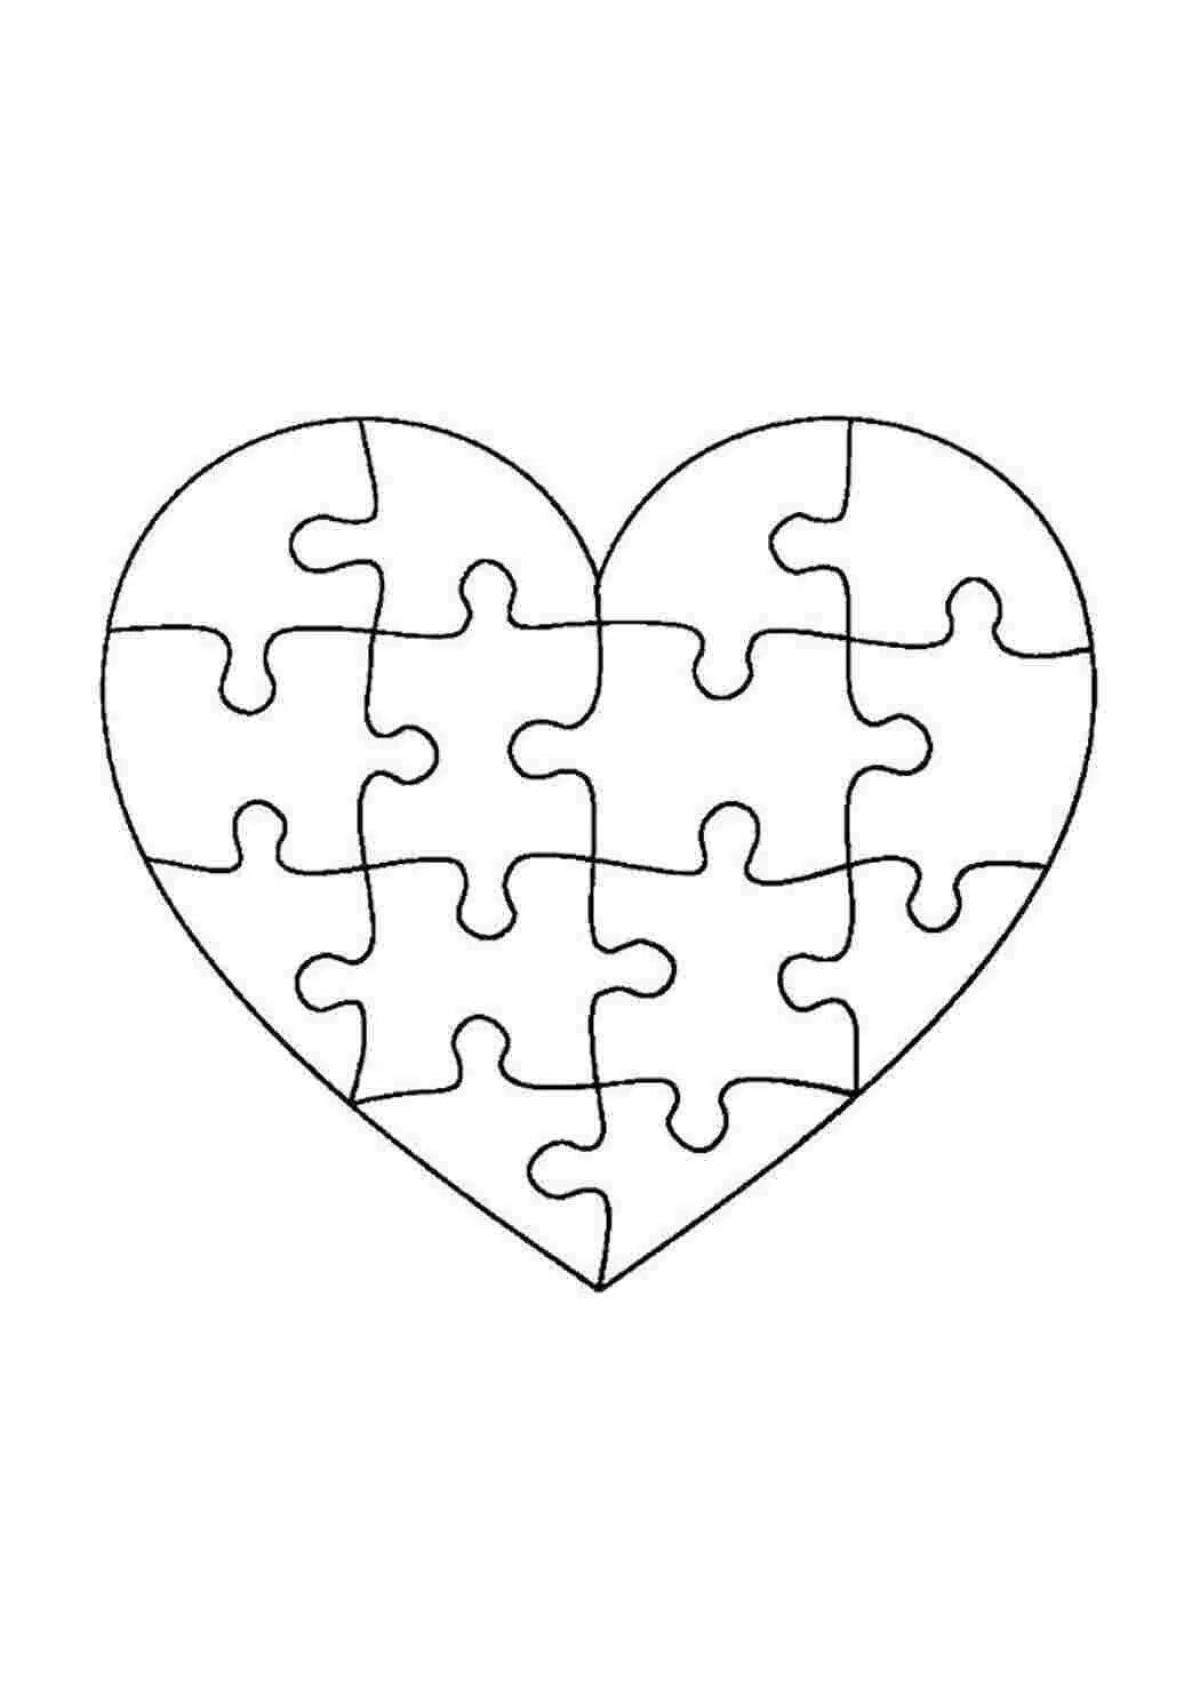 Attractive heart puzzle page